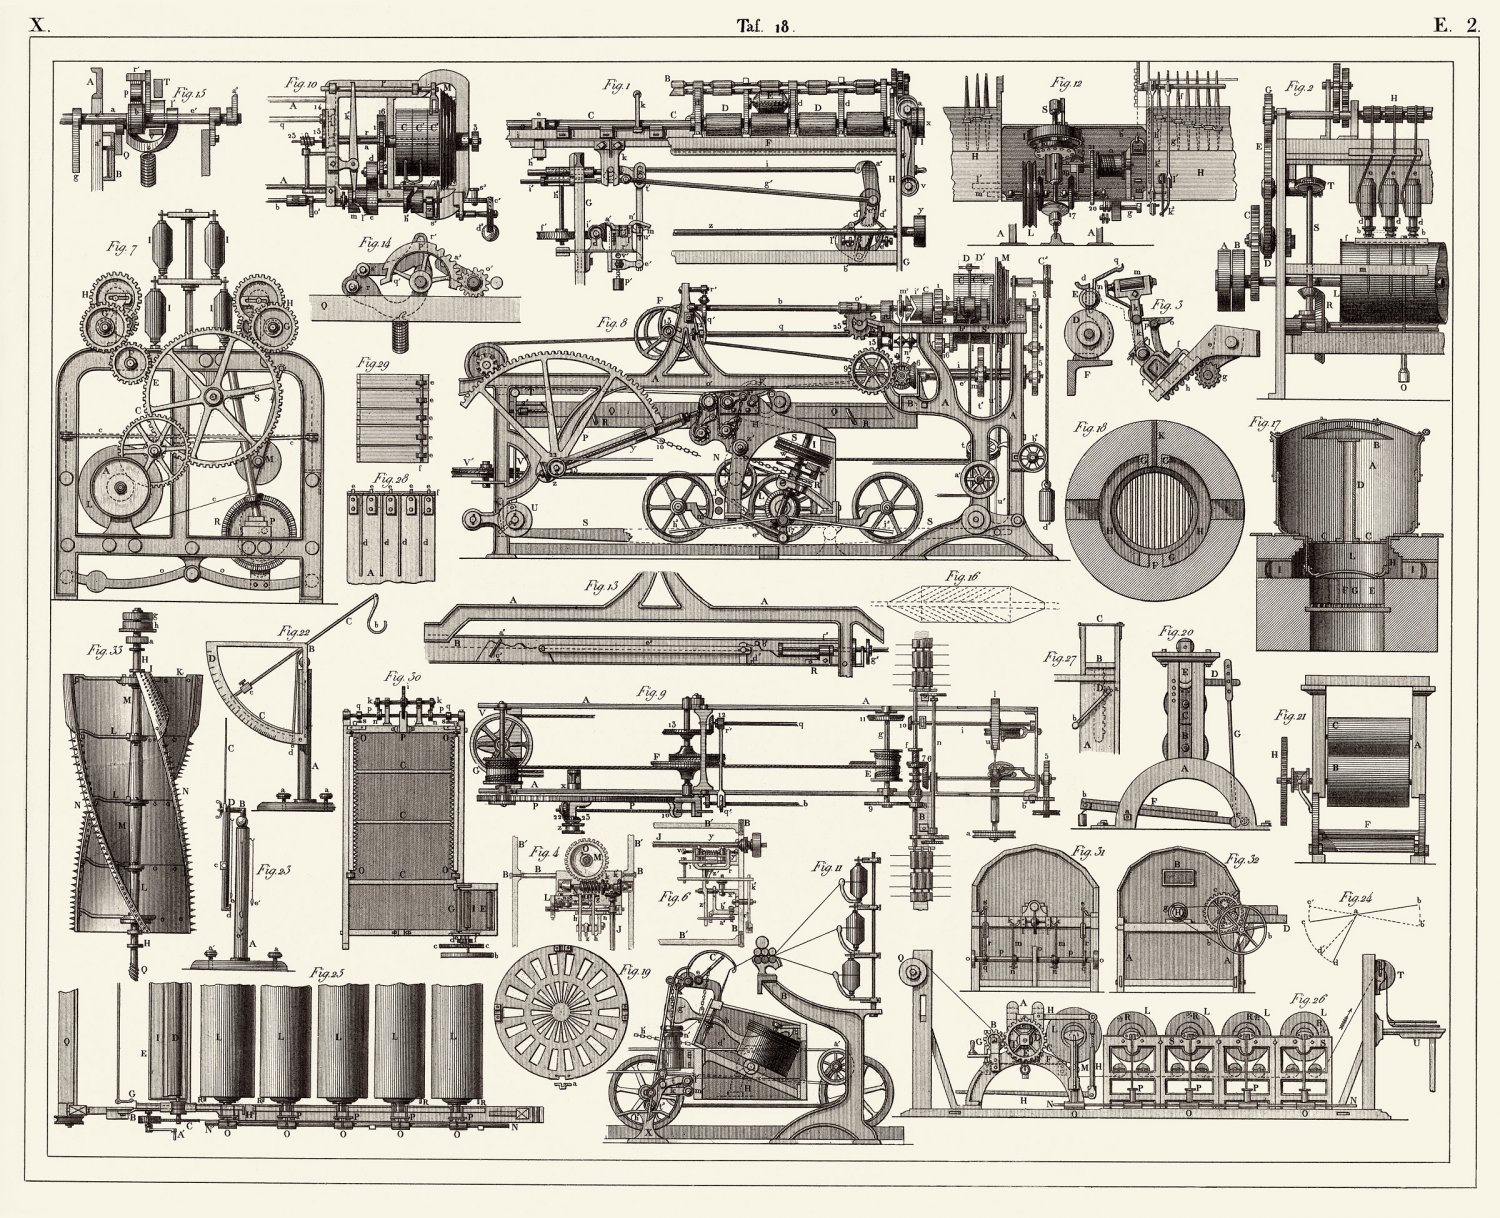 Vintage Engineering Experimental Science Tools Chart 13"x19" (32cm/49cm) Polyester Fabric Poster